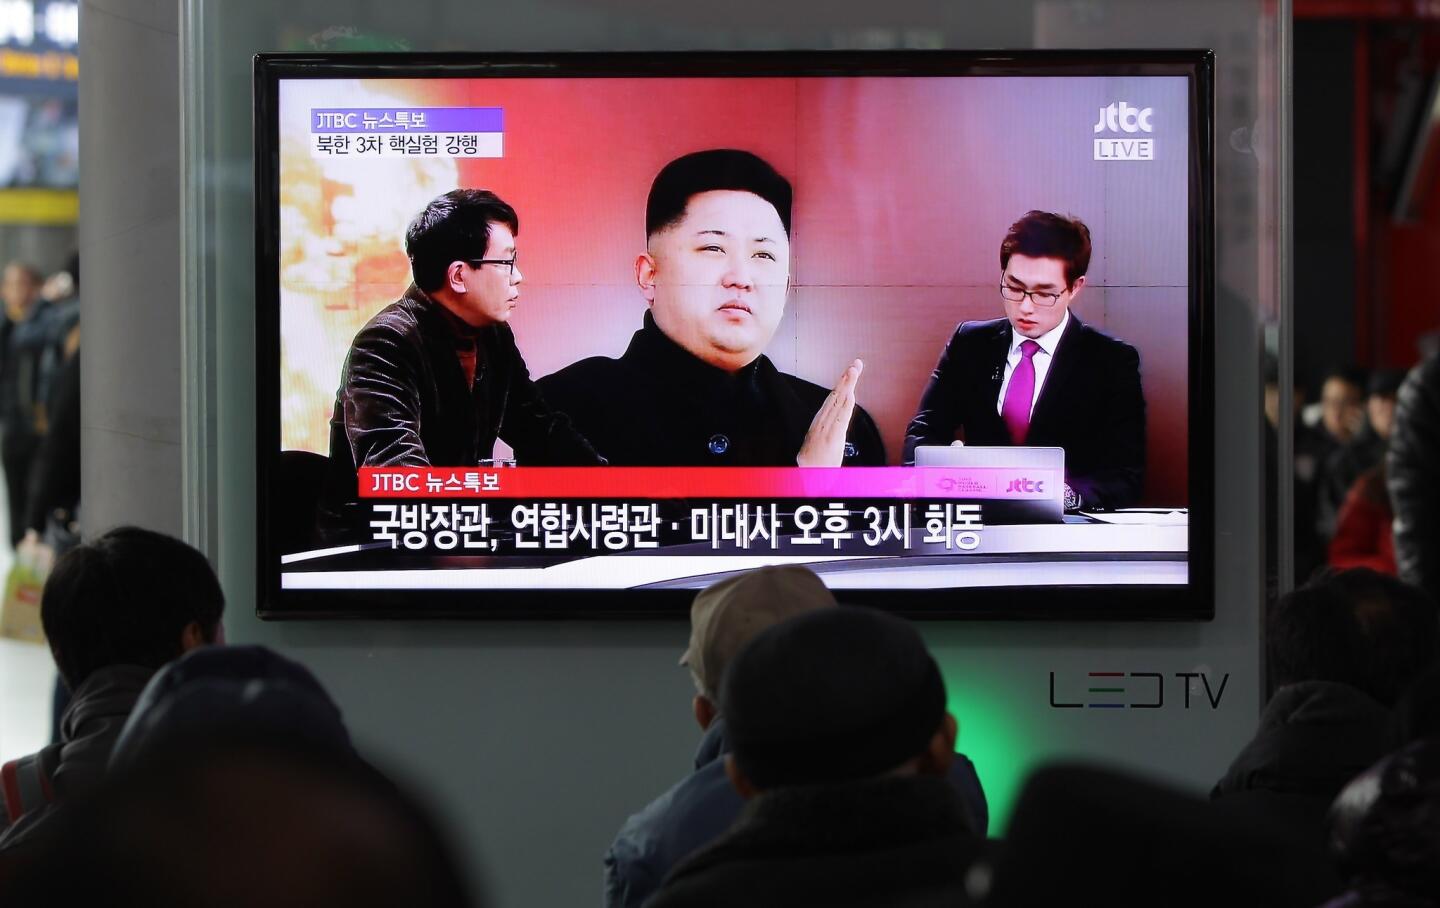 South Korea Reacts To North's Third Nuclear Test